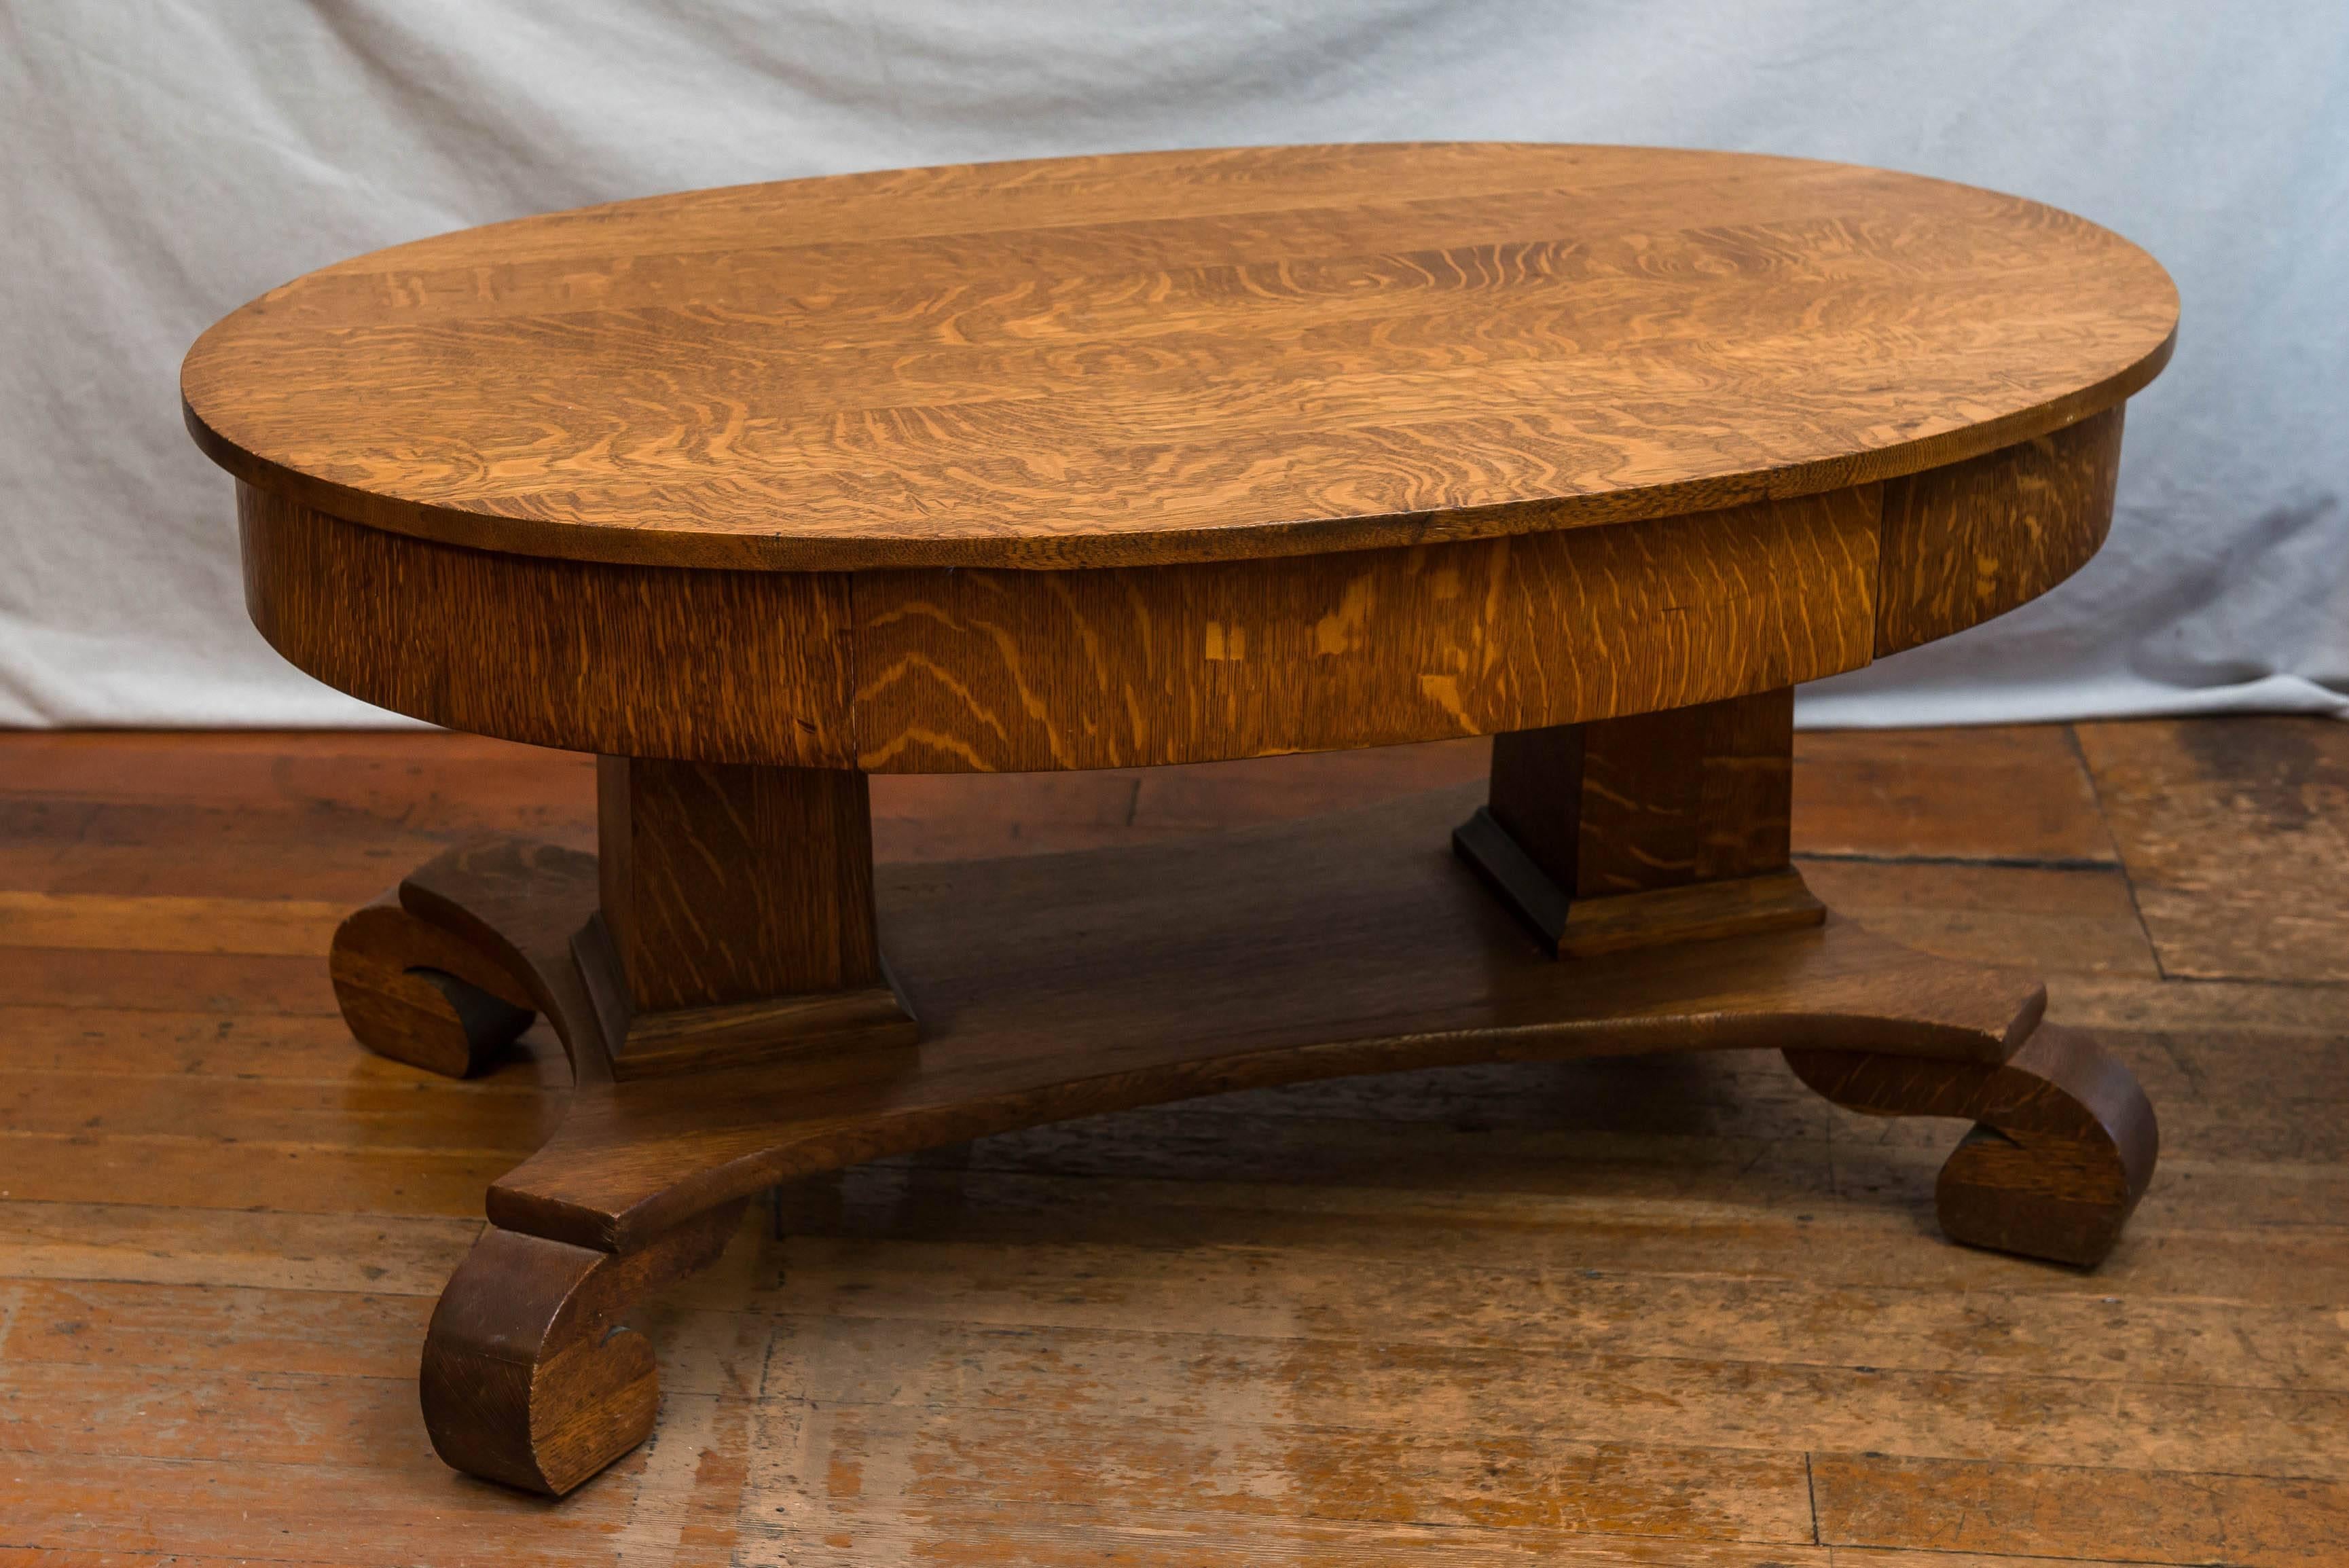 This handsome coffee table has some of the nicest tiger oak grain. The top is solid, not veneer. It has the added feature of a drawer.
Who doesn't need a beautiful coffee table.